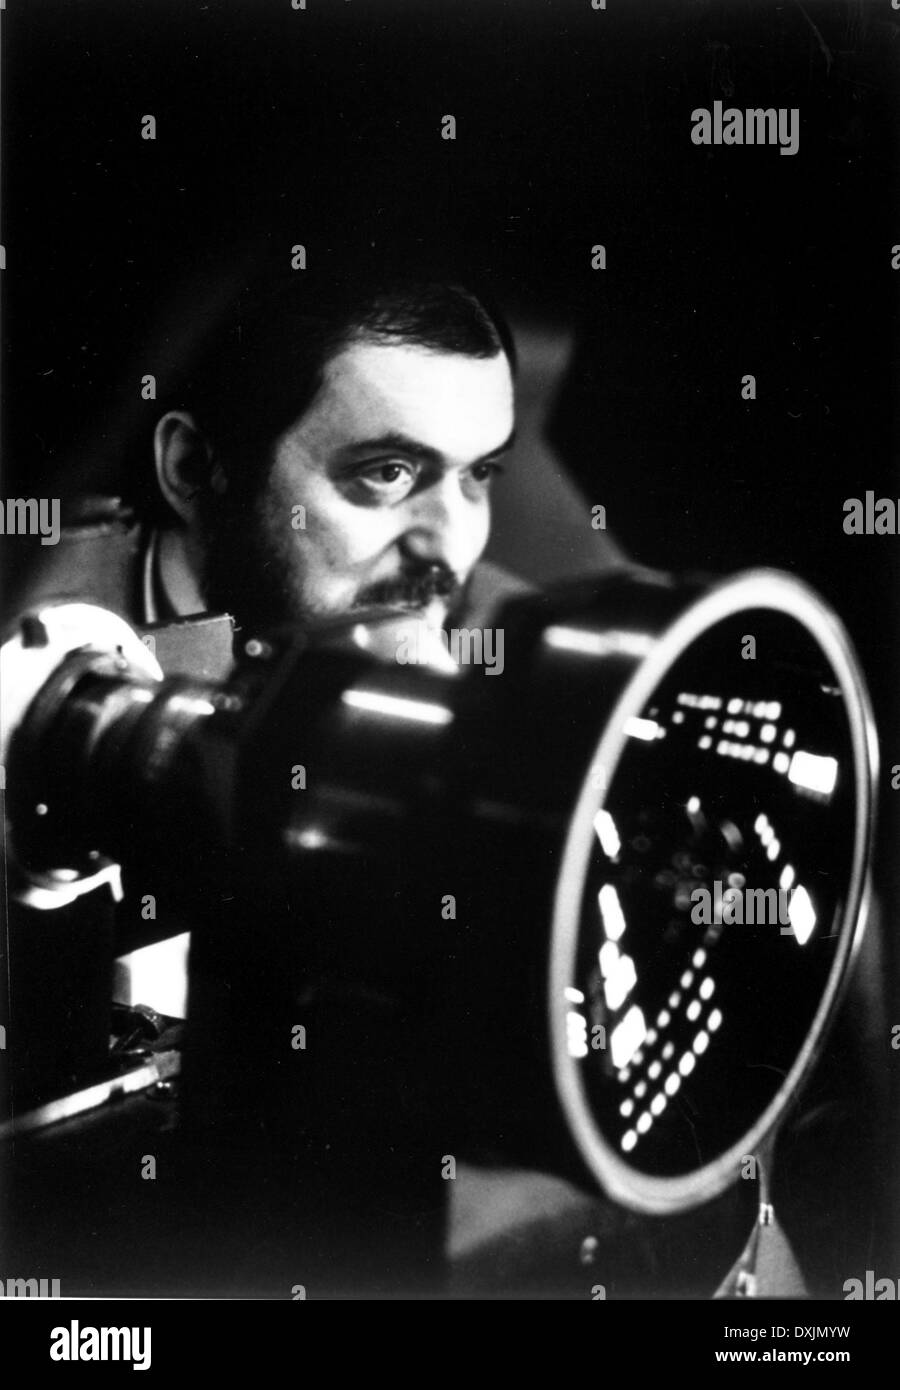 2001 A SPACE ODYSSEY (US/UK 1968) STANLEY KUBRICK (director) Stock Photo